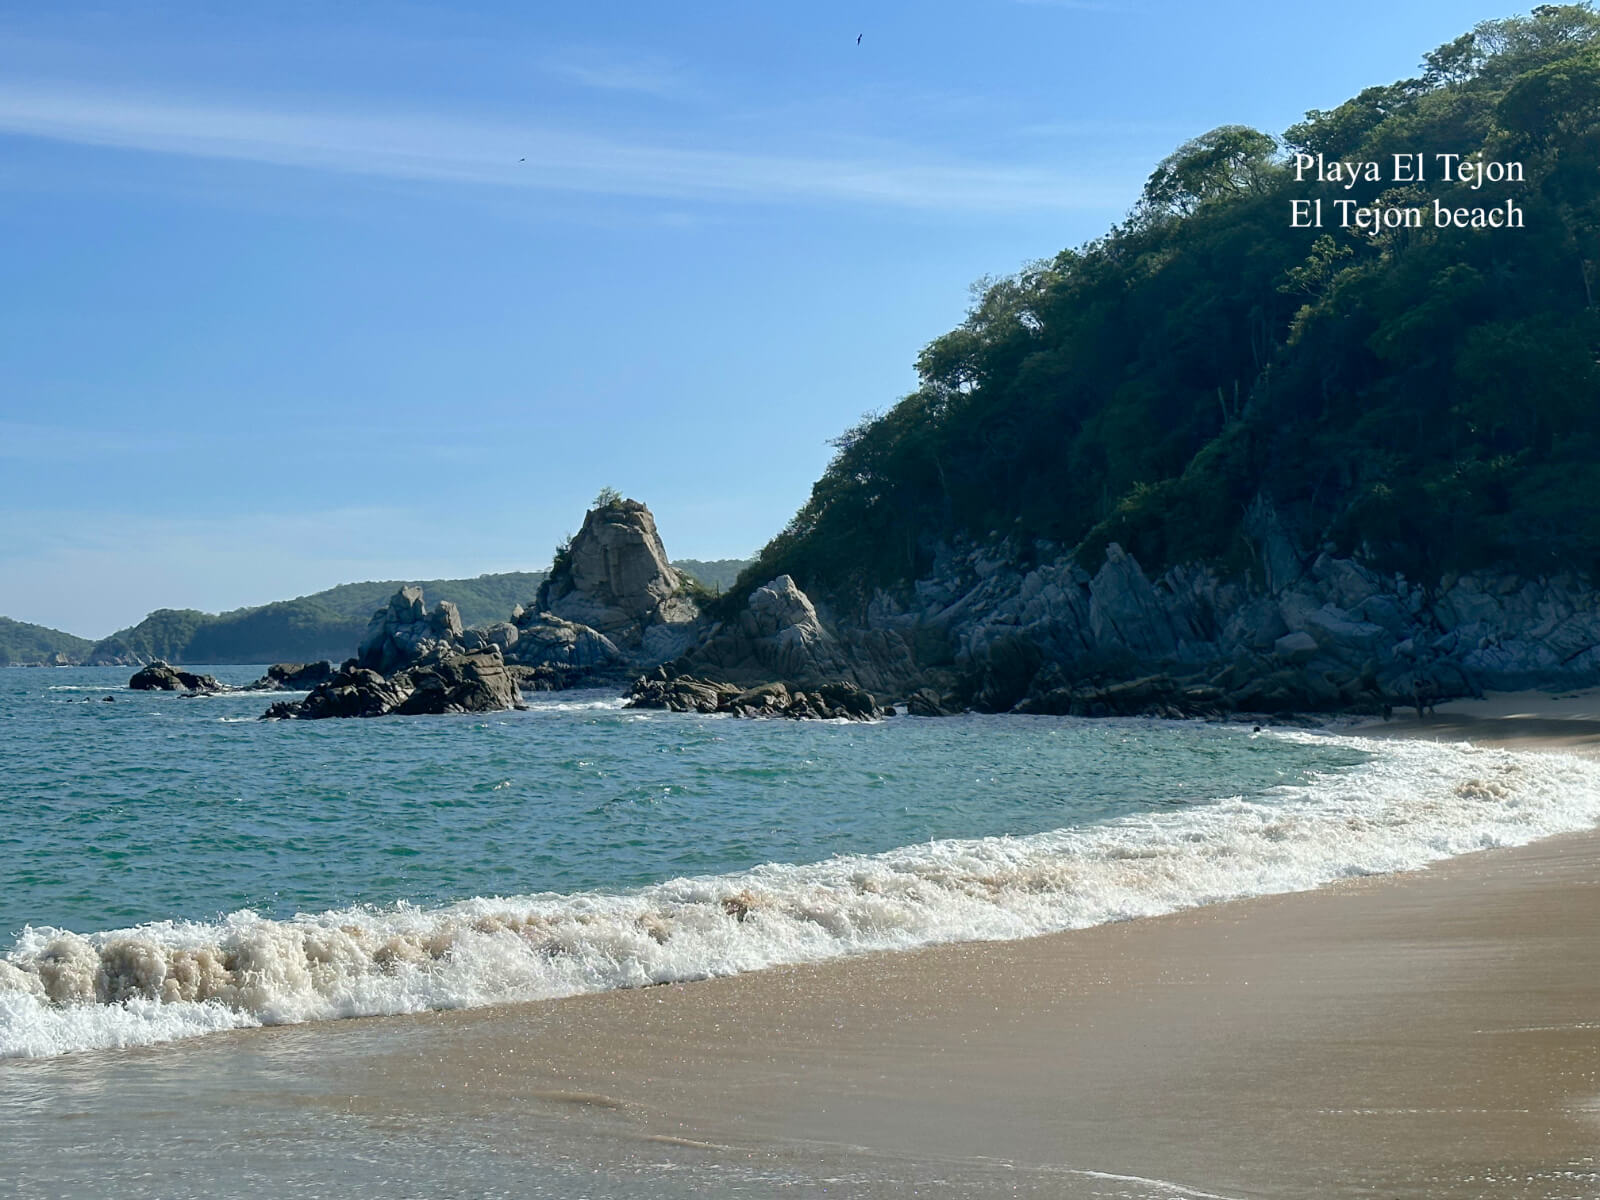 Condo with ocean view, garden, and private pool for sale in Huatulco.